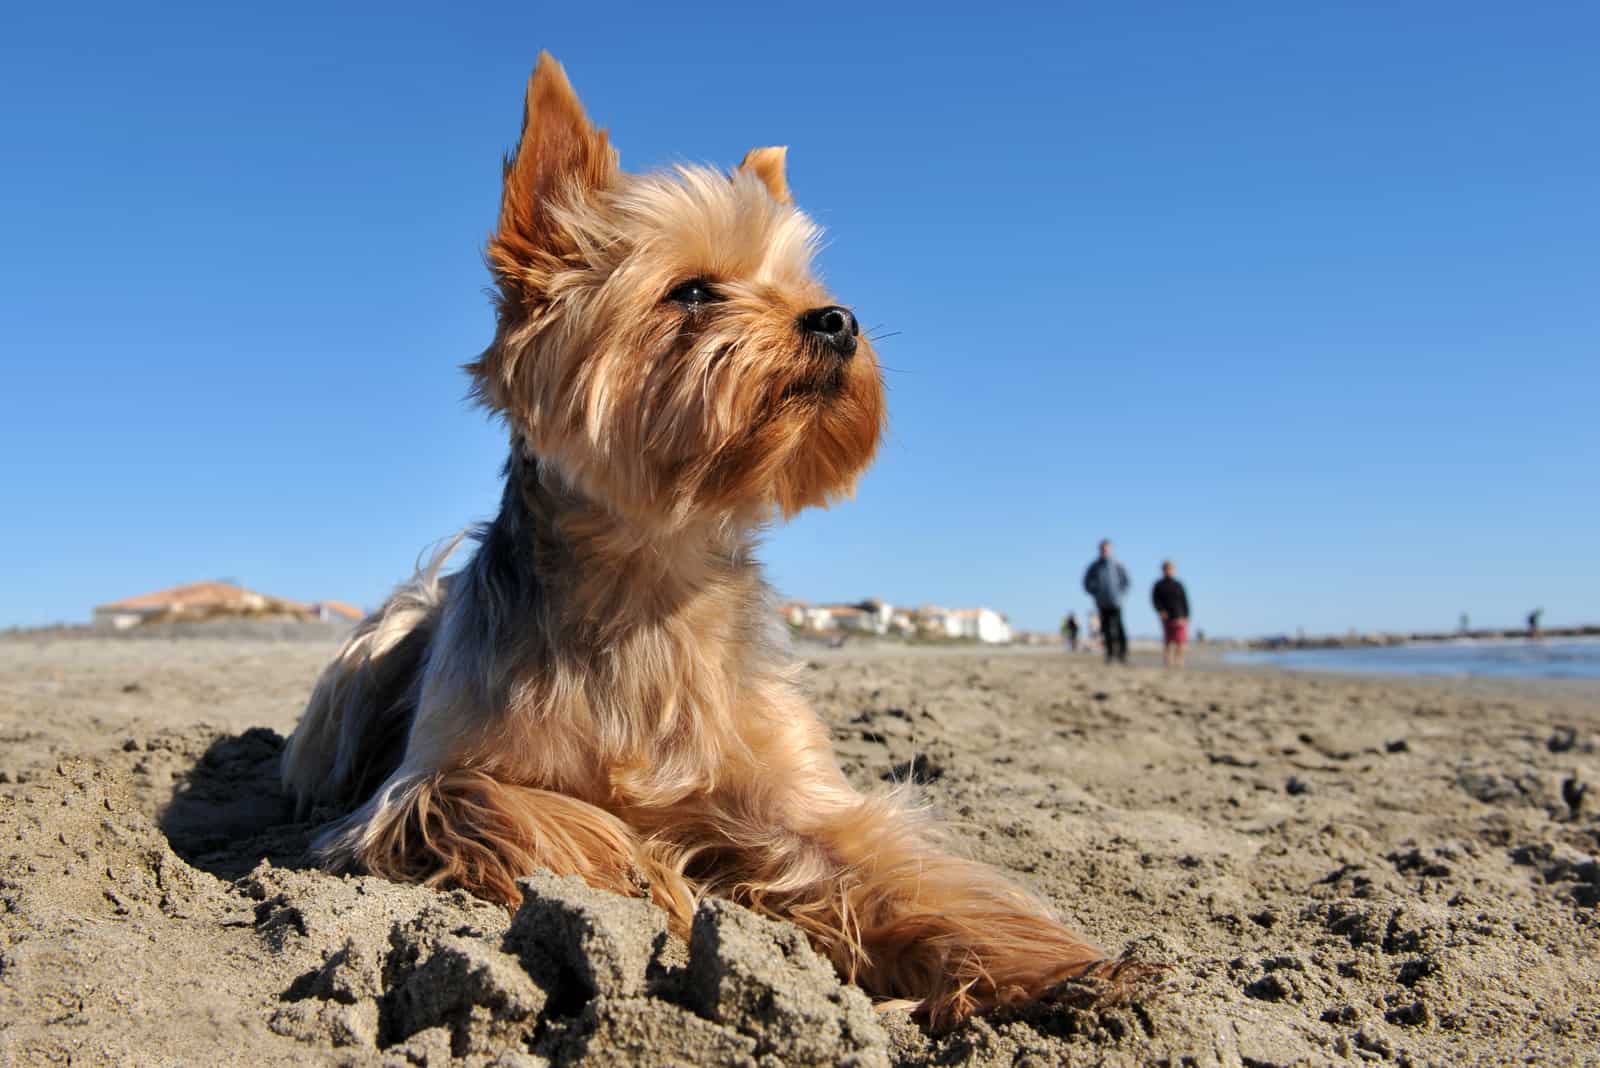 The Yorkshire Terrier lies on the beach